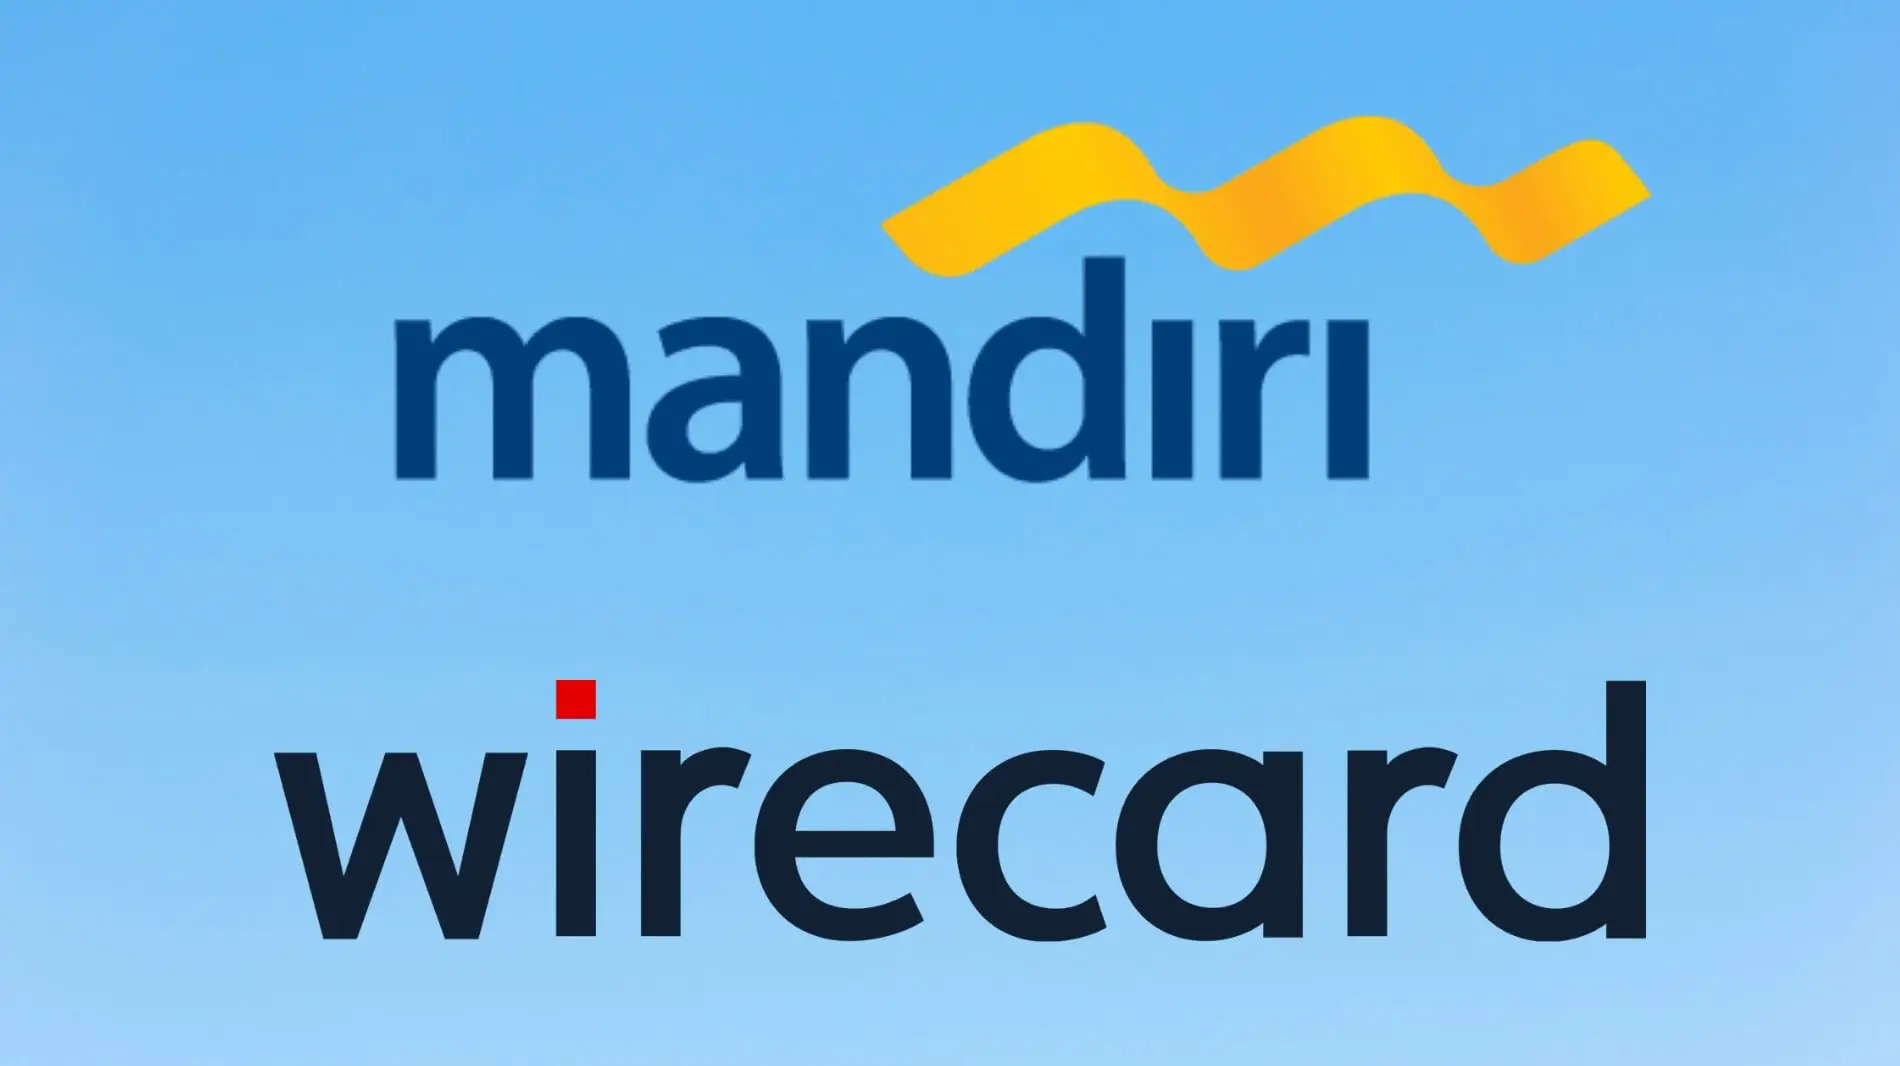 Wirecard and Bank Mandiri Cooperate on Digital Financial Solutions for Corporate Customers